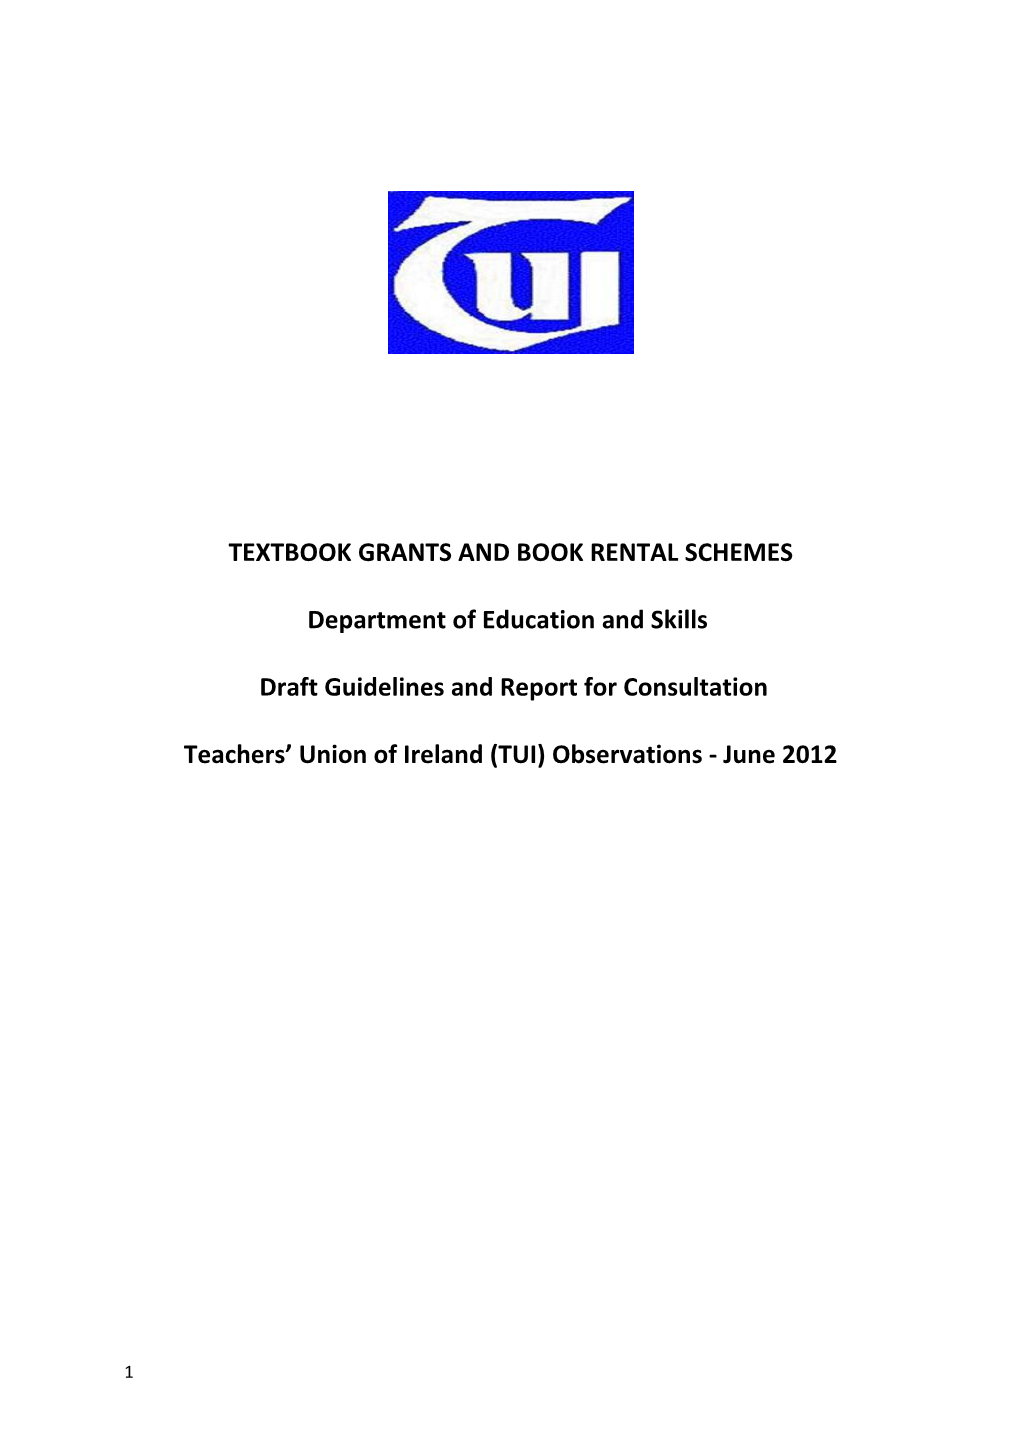 Textbook Grants and Book Rental Schemes